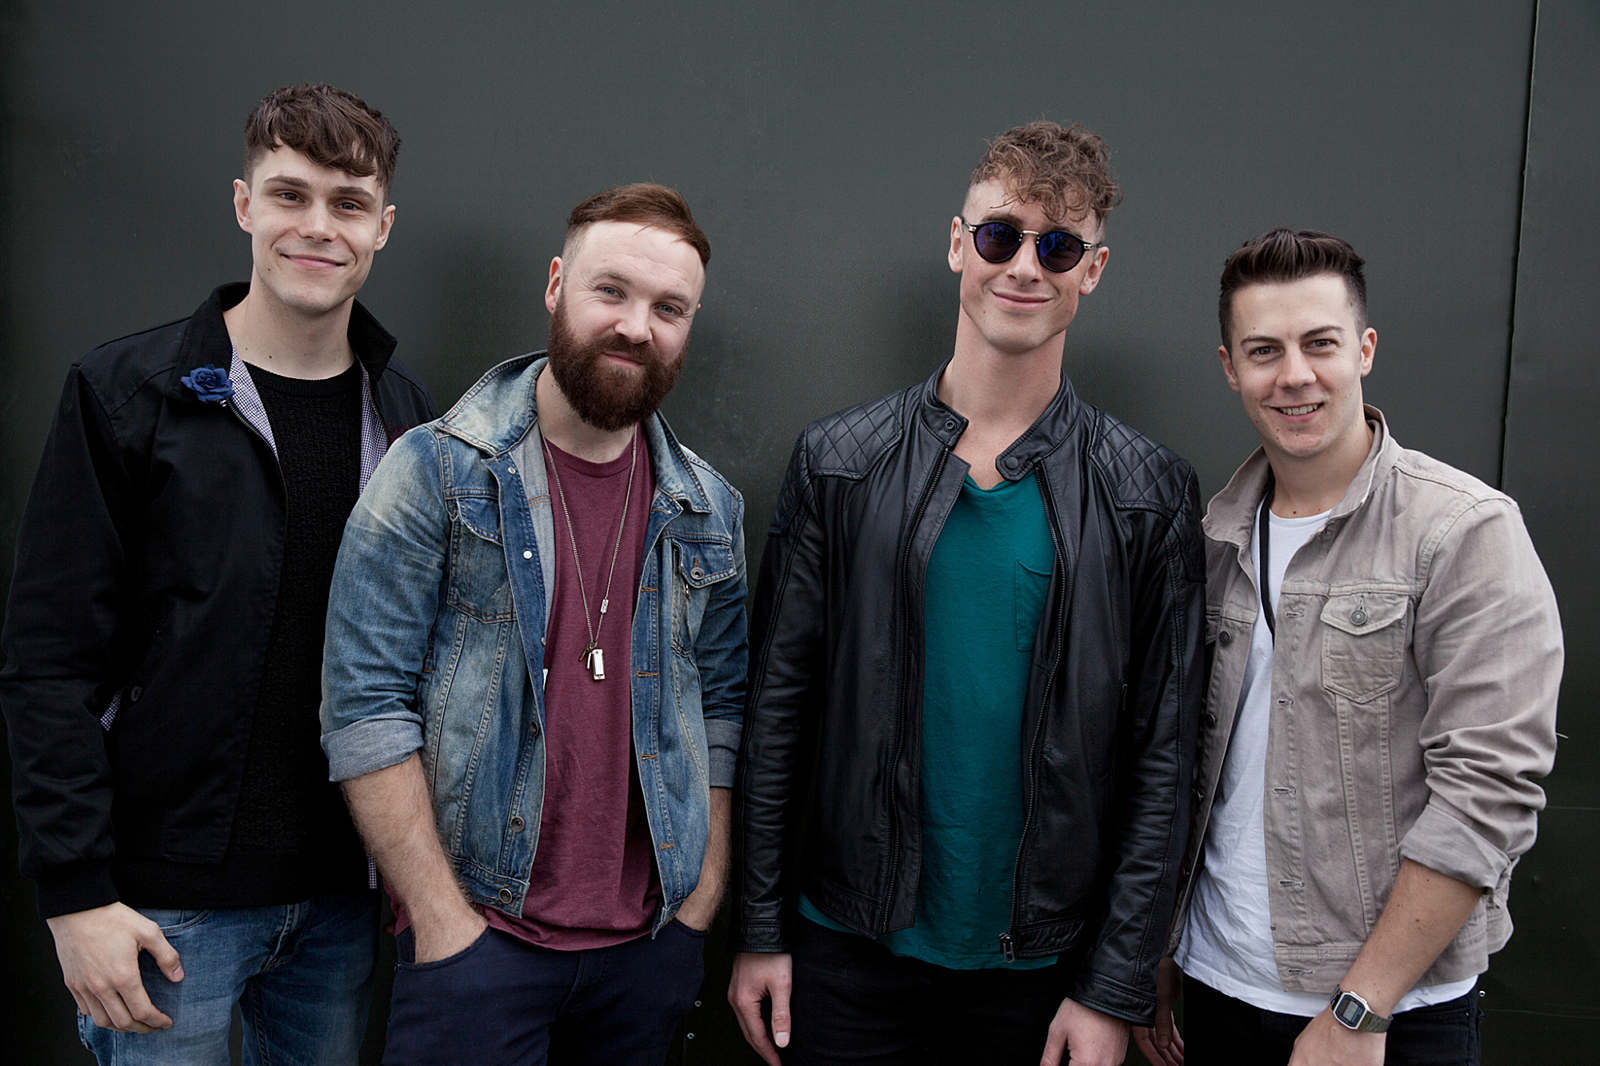 Win tickets for Don Broco at Dr. Martens' #STANDFORSOMETHING Tour in association with DIY